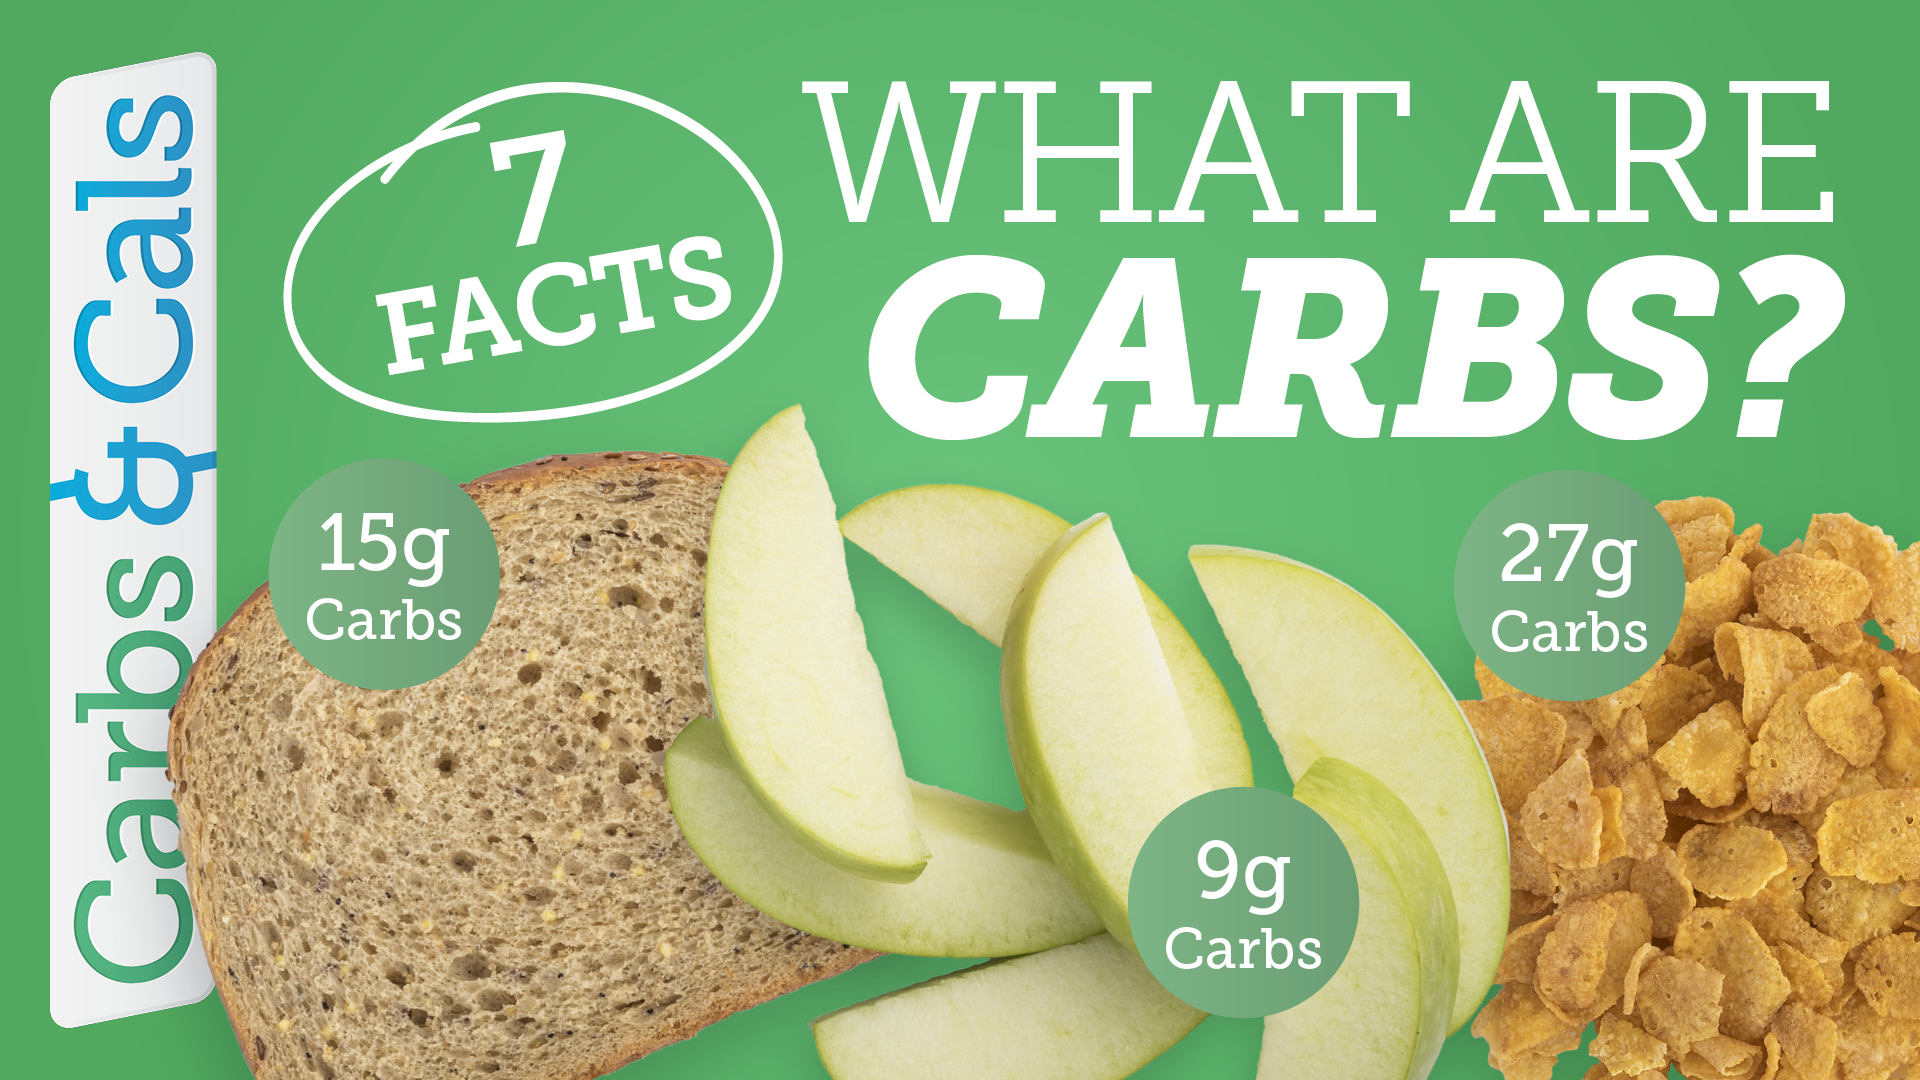 Video - What are Carbs? 7 Facts about Carbs